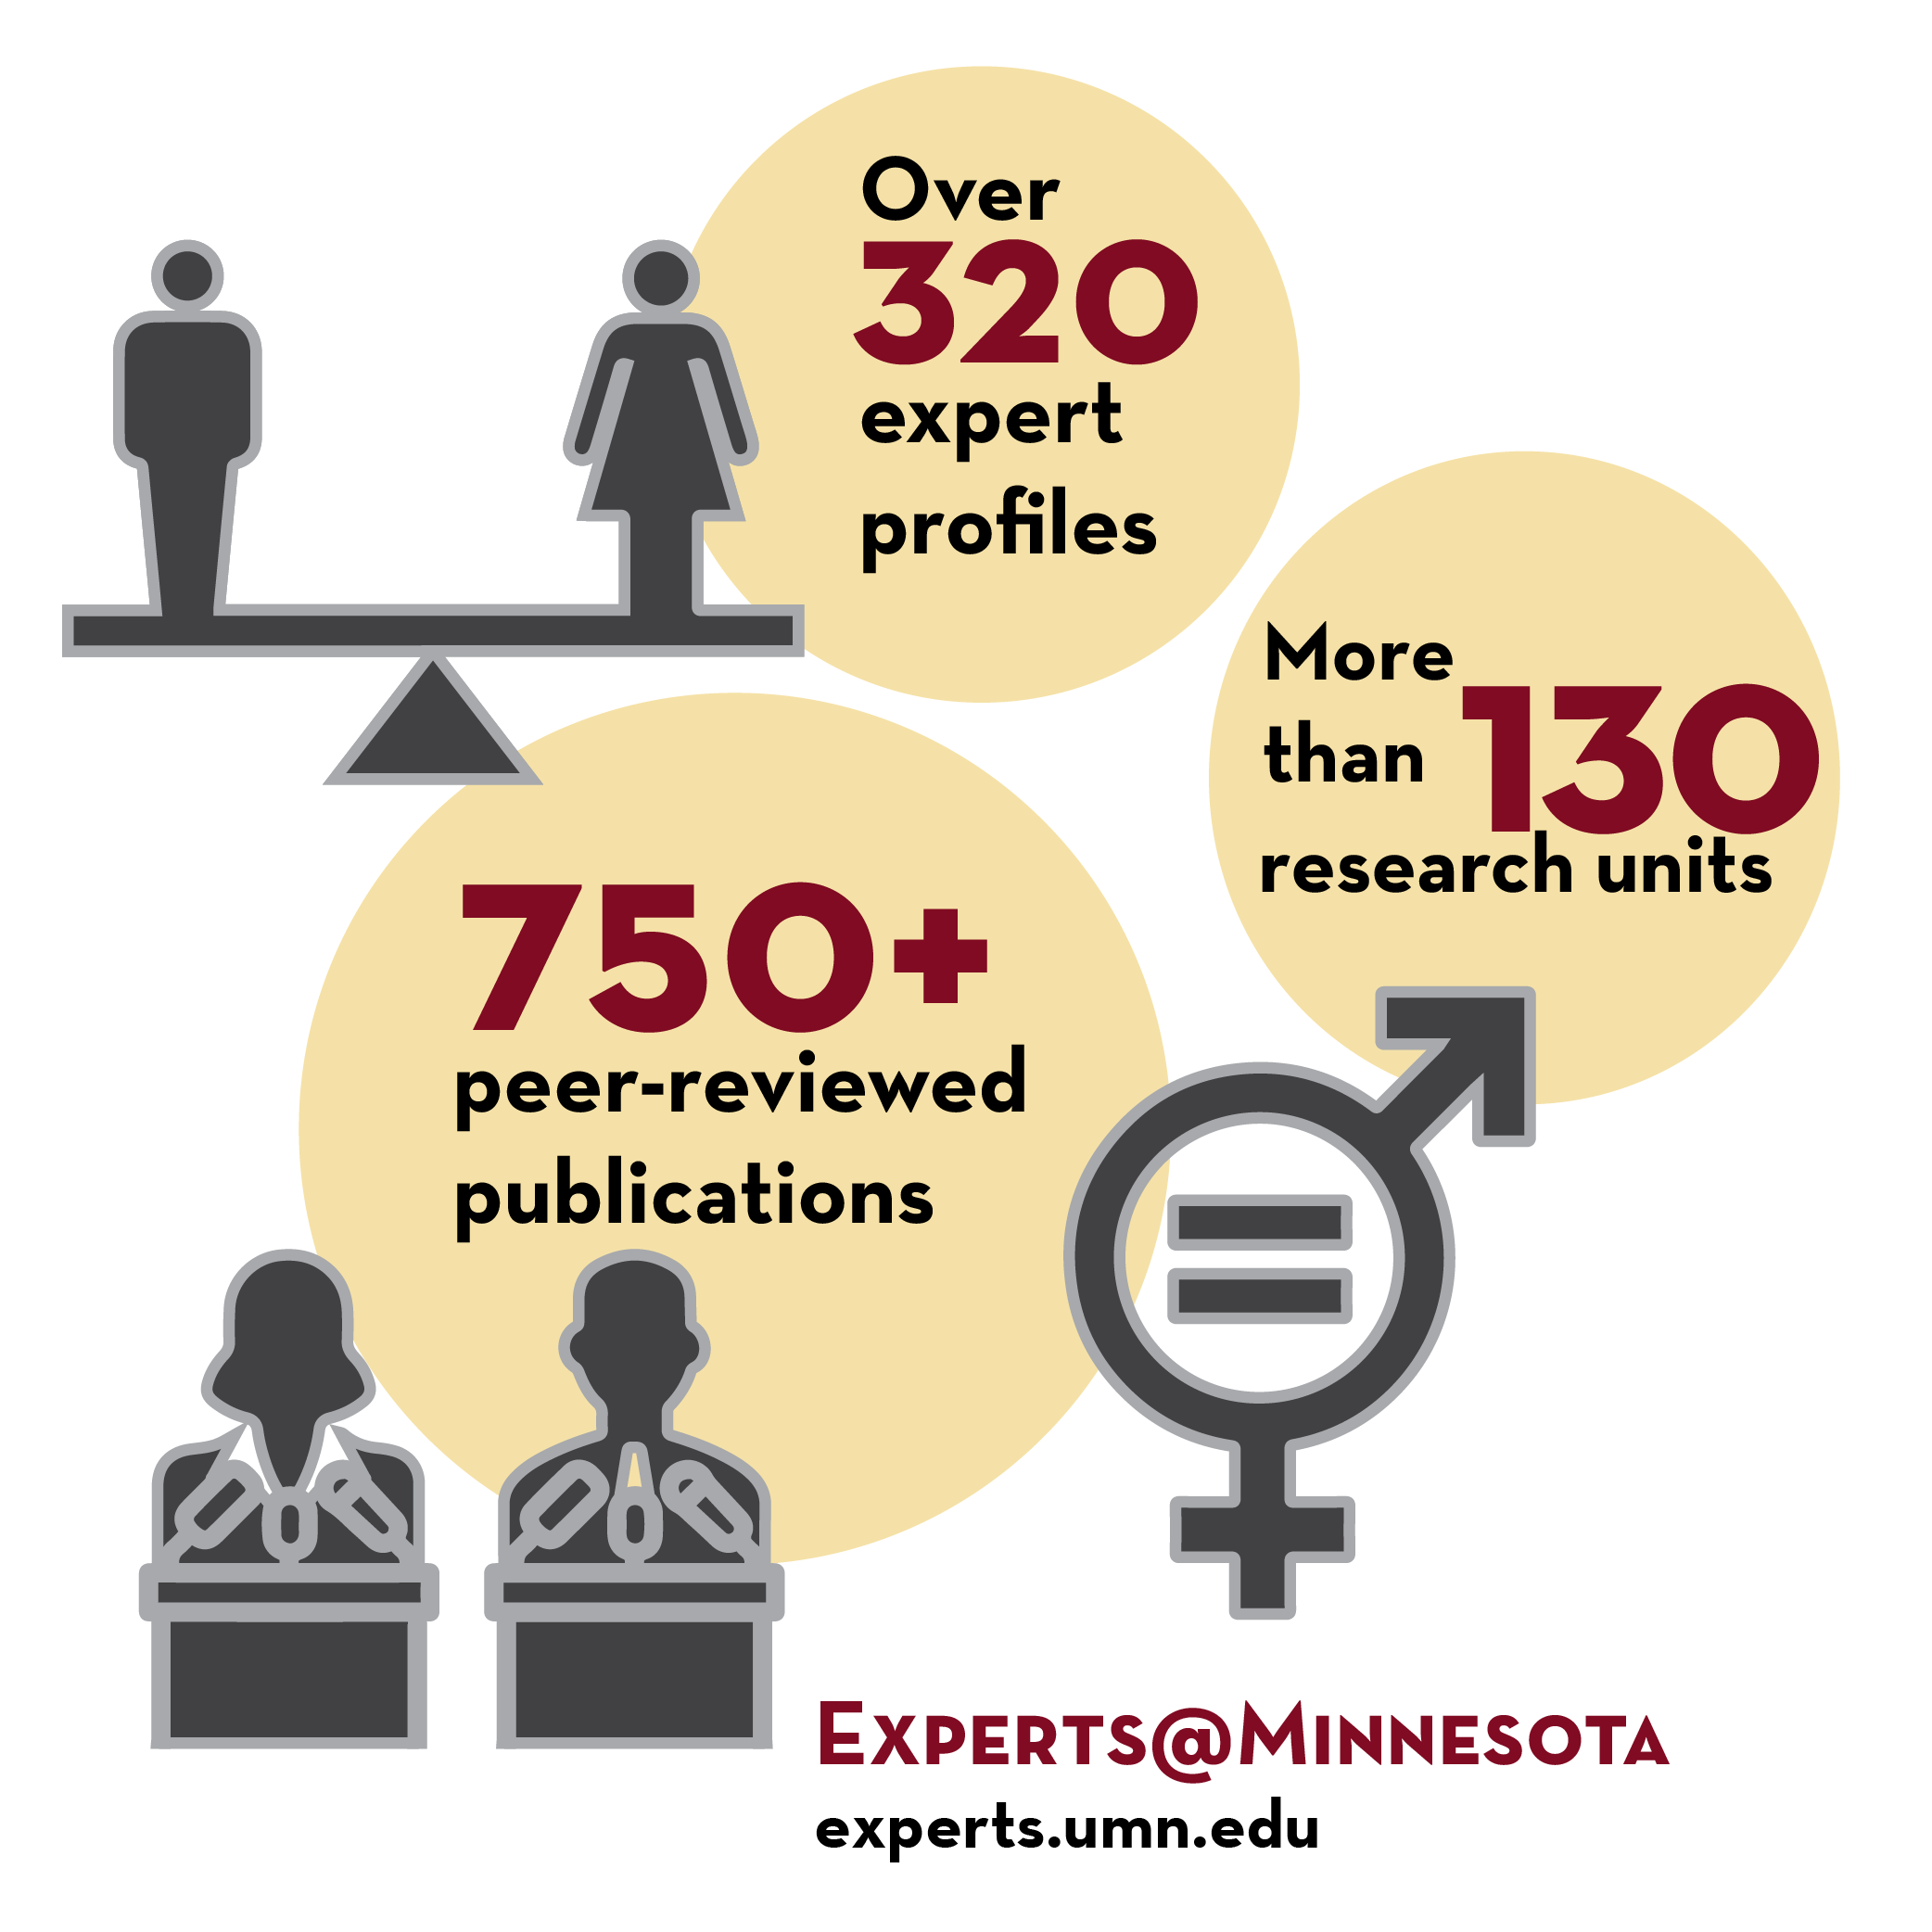 SDG 5 Experts data. Over 320 profiles, More than 130 research units, 750 plus publications.